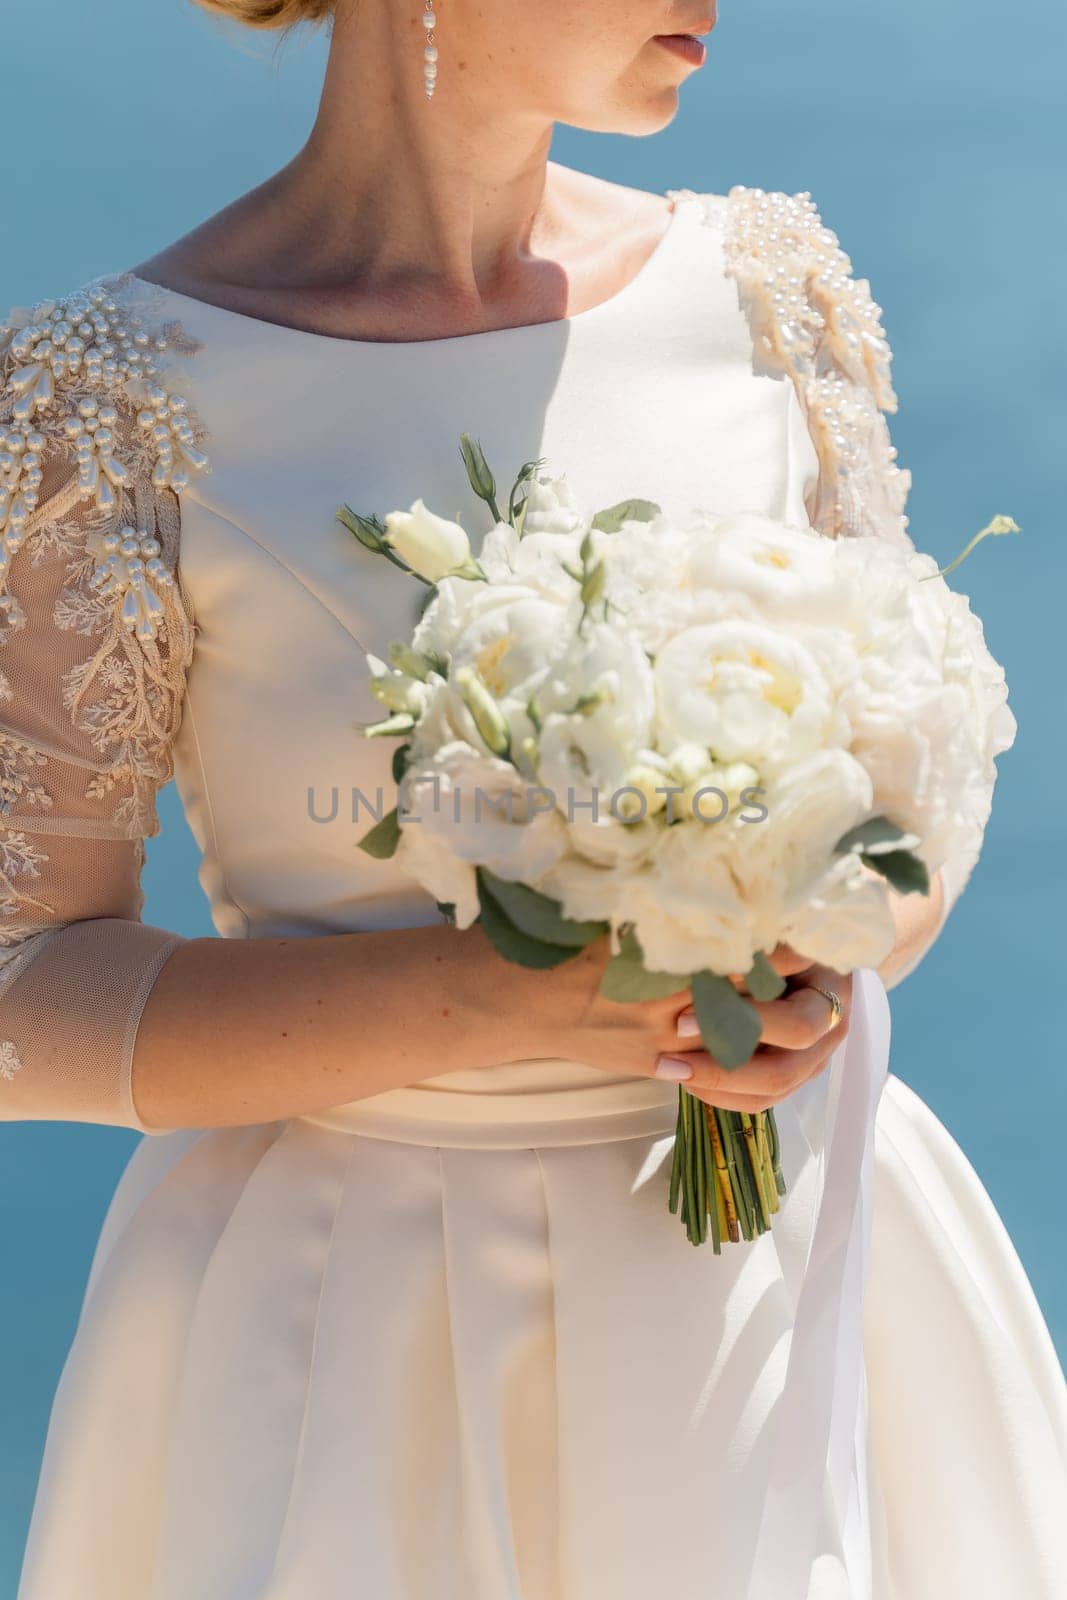 bride is holding a bouquet of white flowers. The bouquet is large and has a lot of flowers in it. The woman is wearing a white dress and a gold ring on her finger. Scene is elegant and romantic